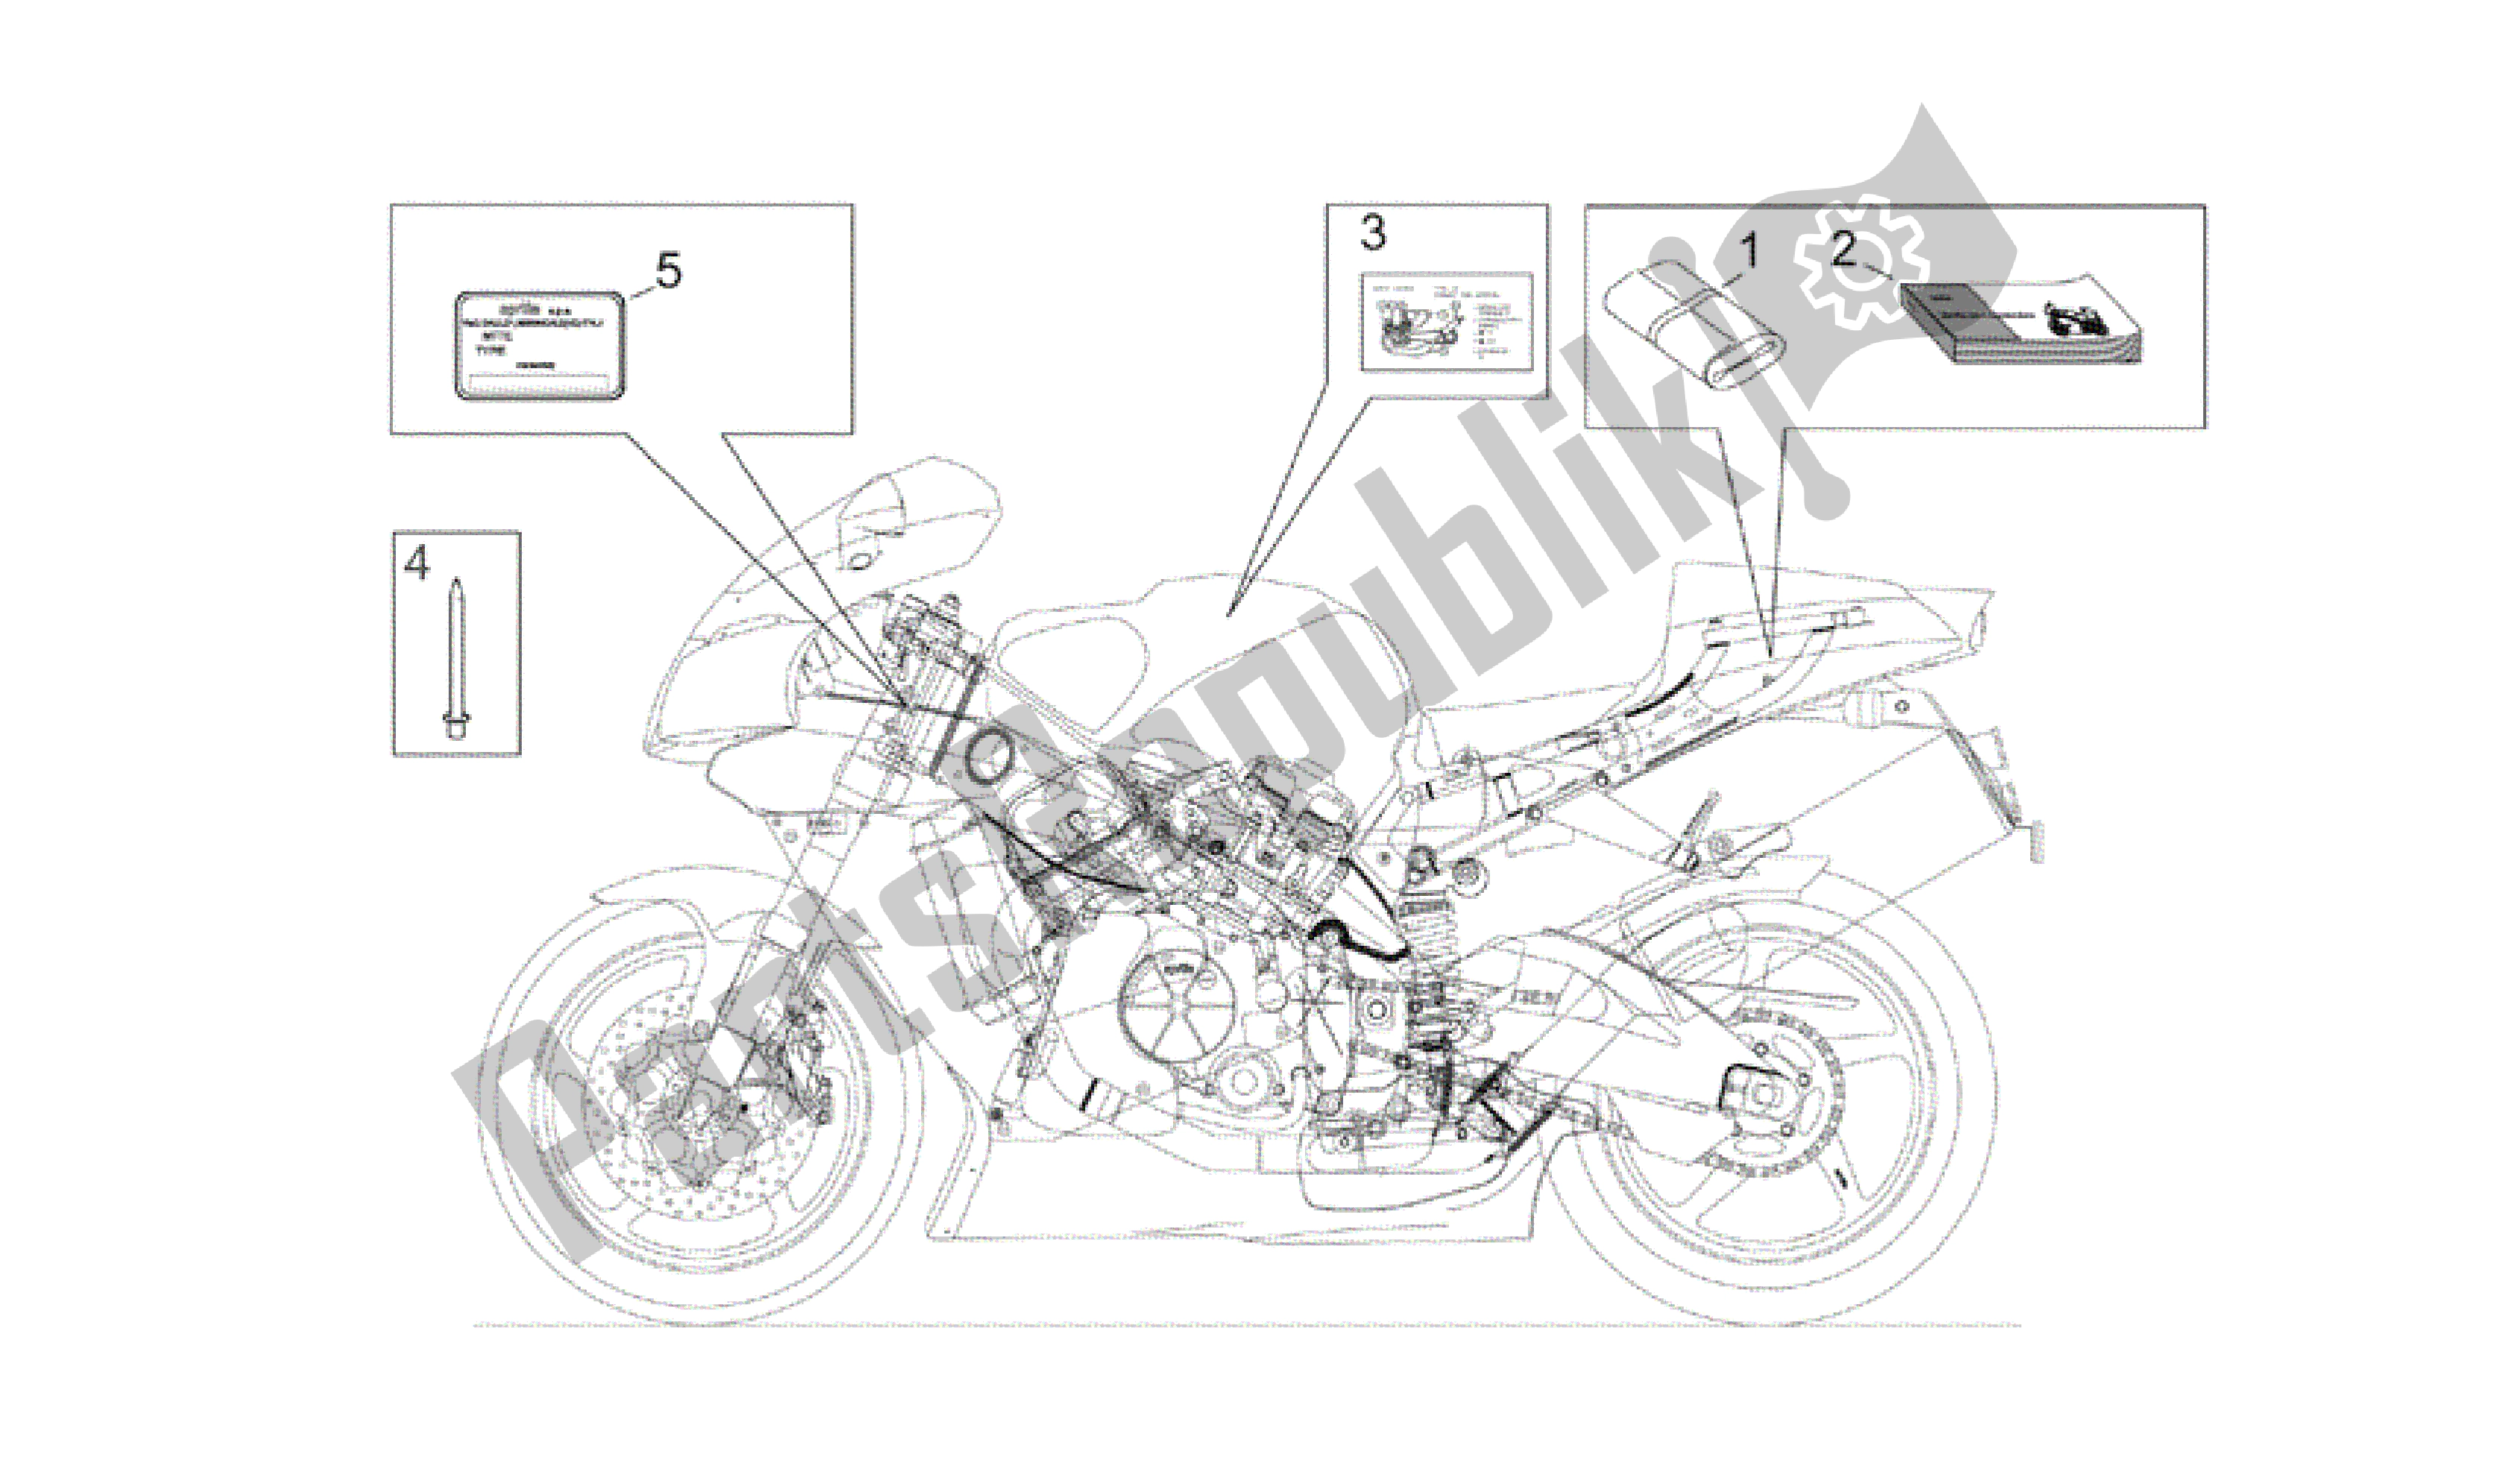 All parts for the Plate Set And Handbooks of the Aprilia RSV Mille R GP1 Limited Edition 3963 1000 2003